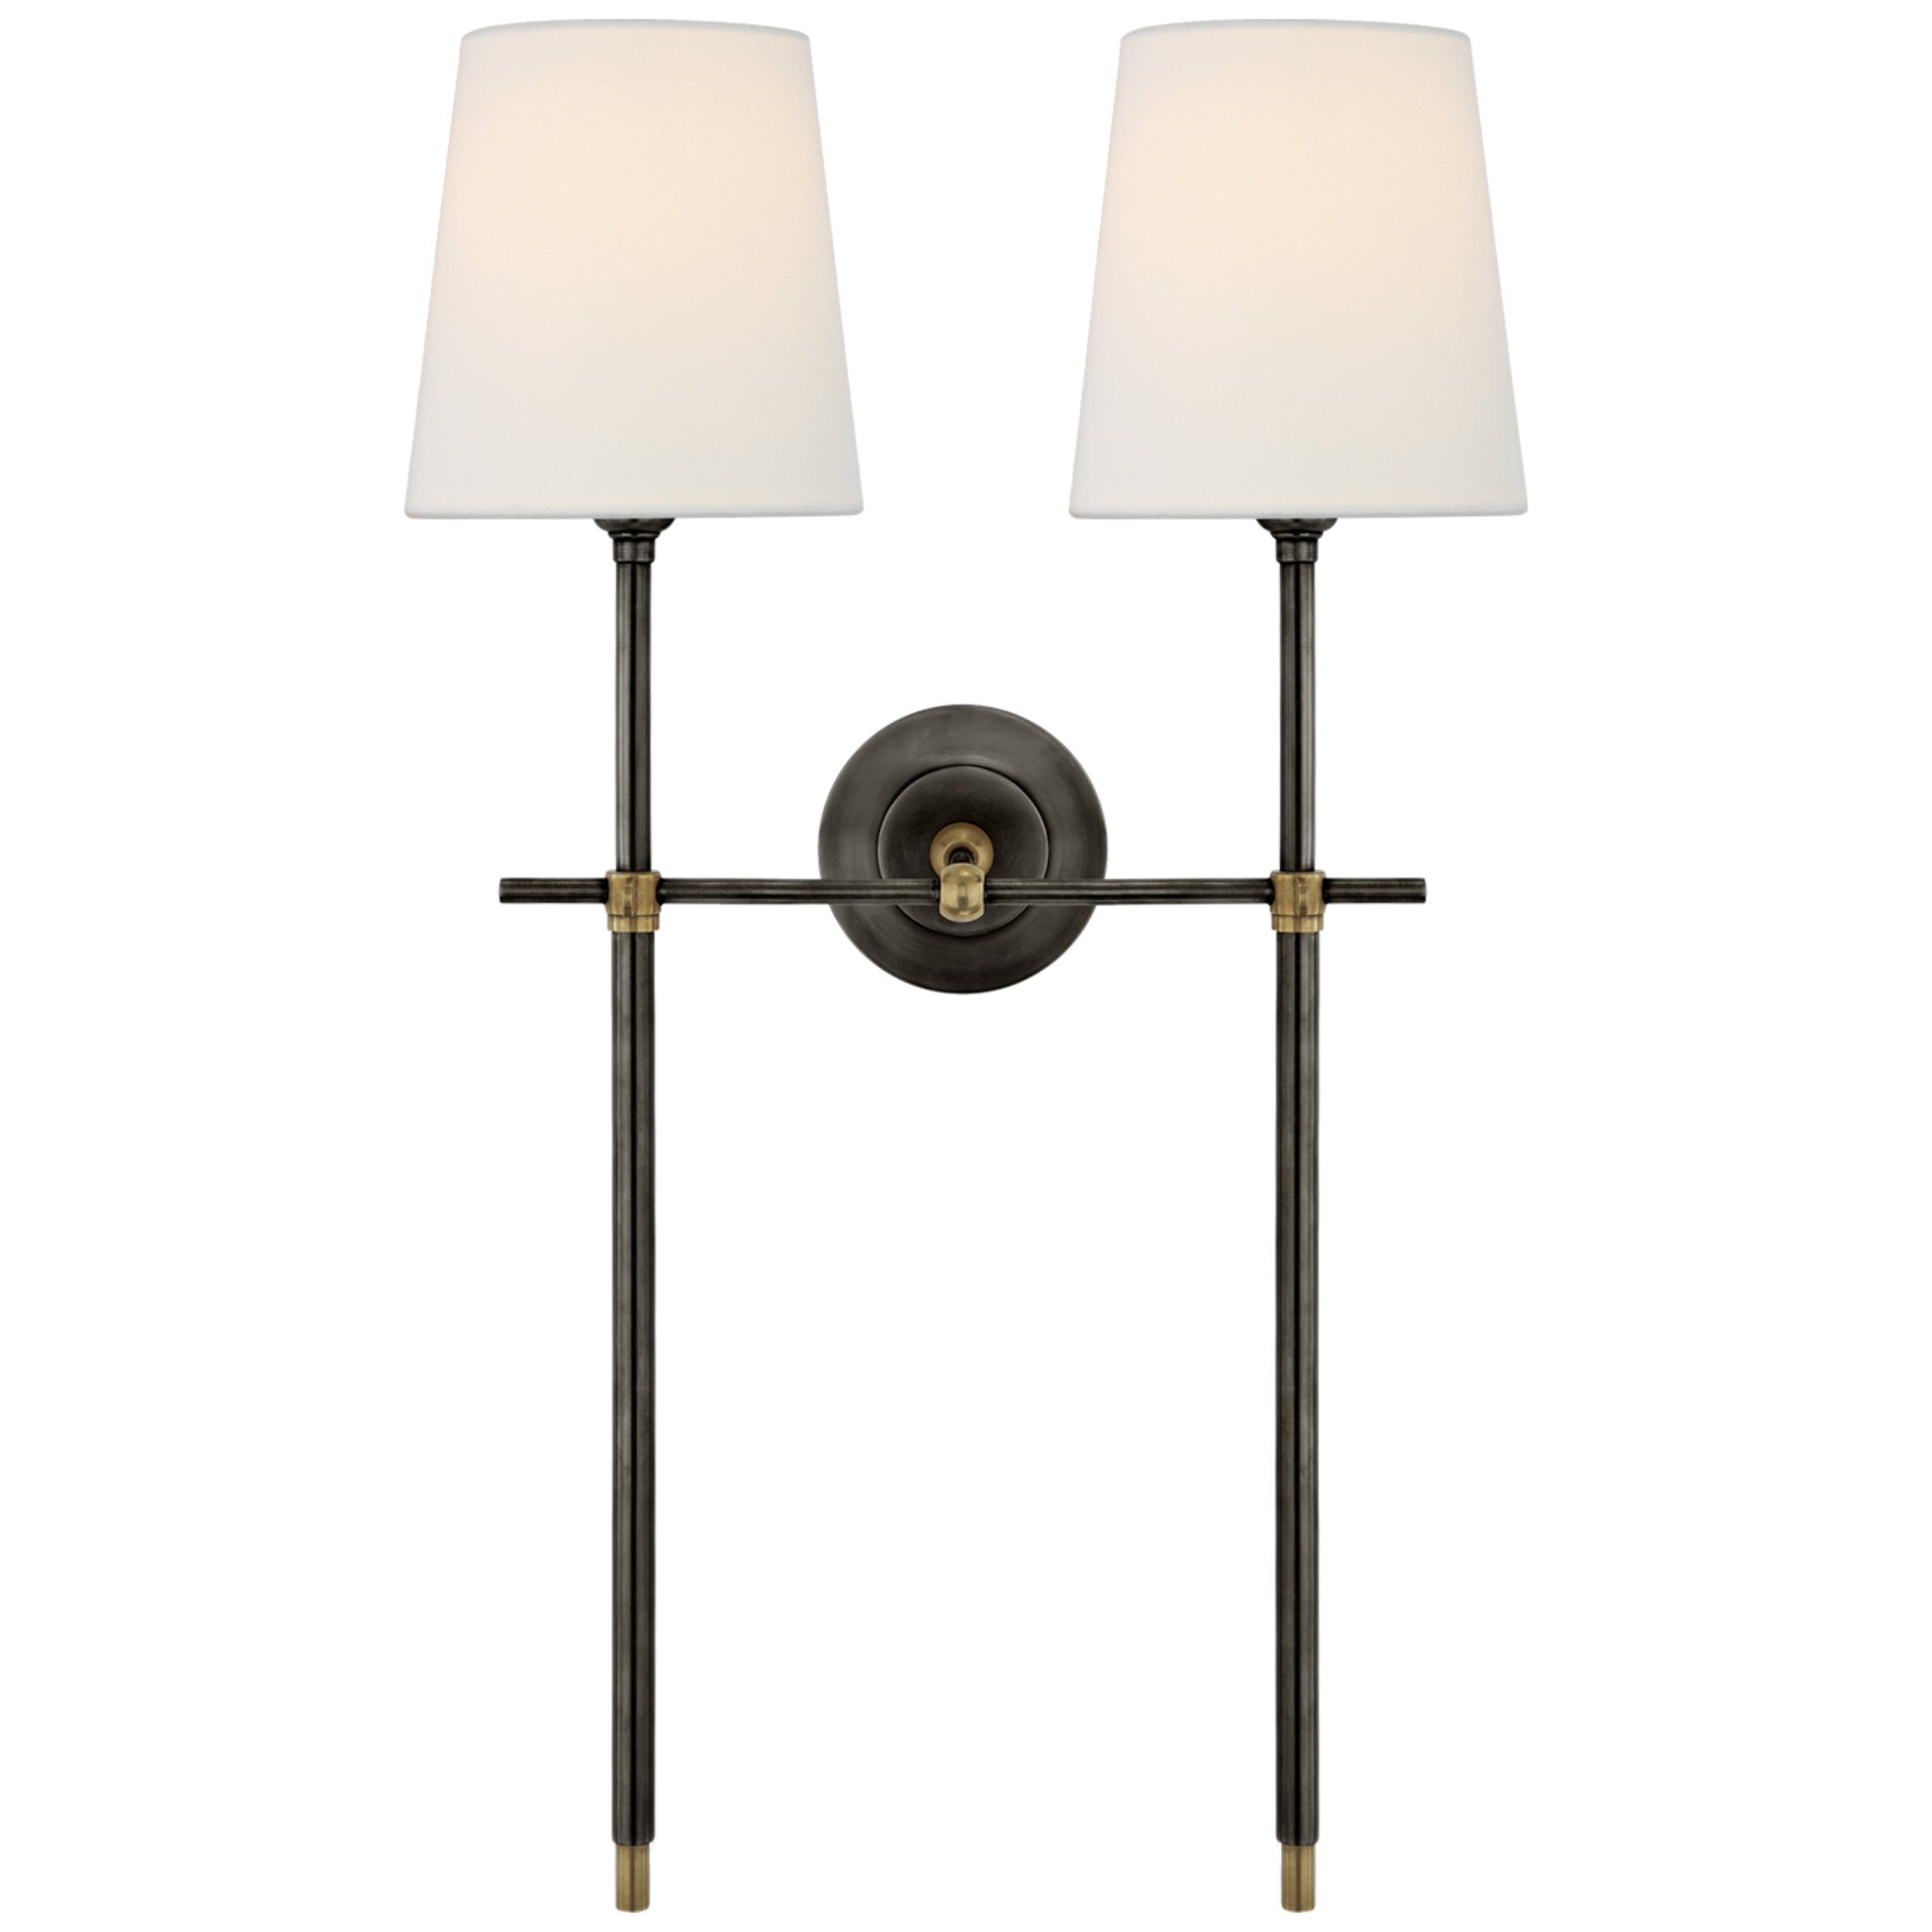 Thomas O'Brien Bryant Large Double Tail Sconce in Bronze and Hand-Rubbed Antique Brass with Linen Shades